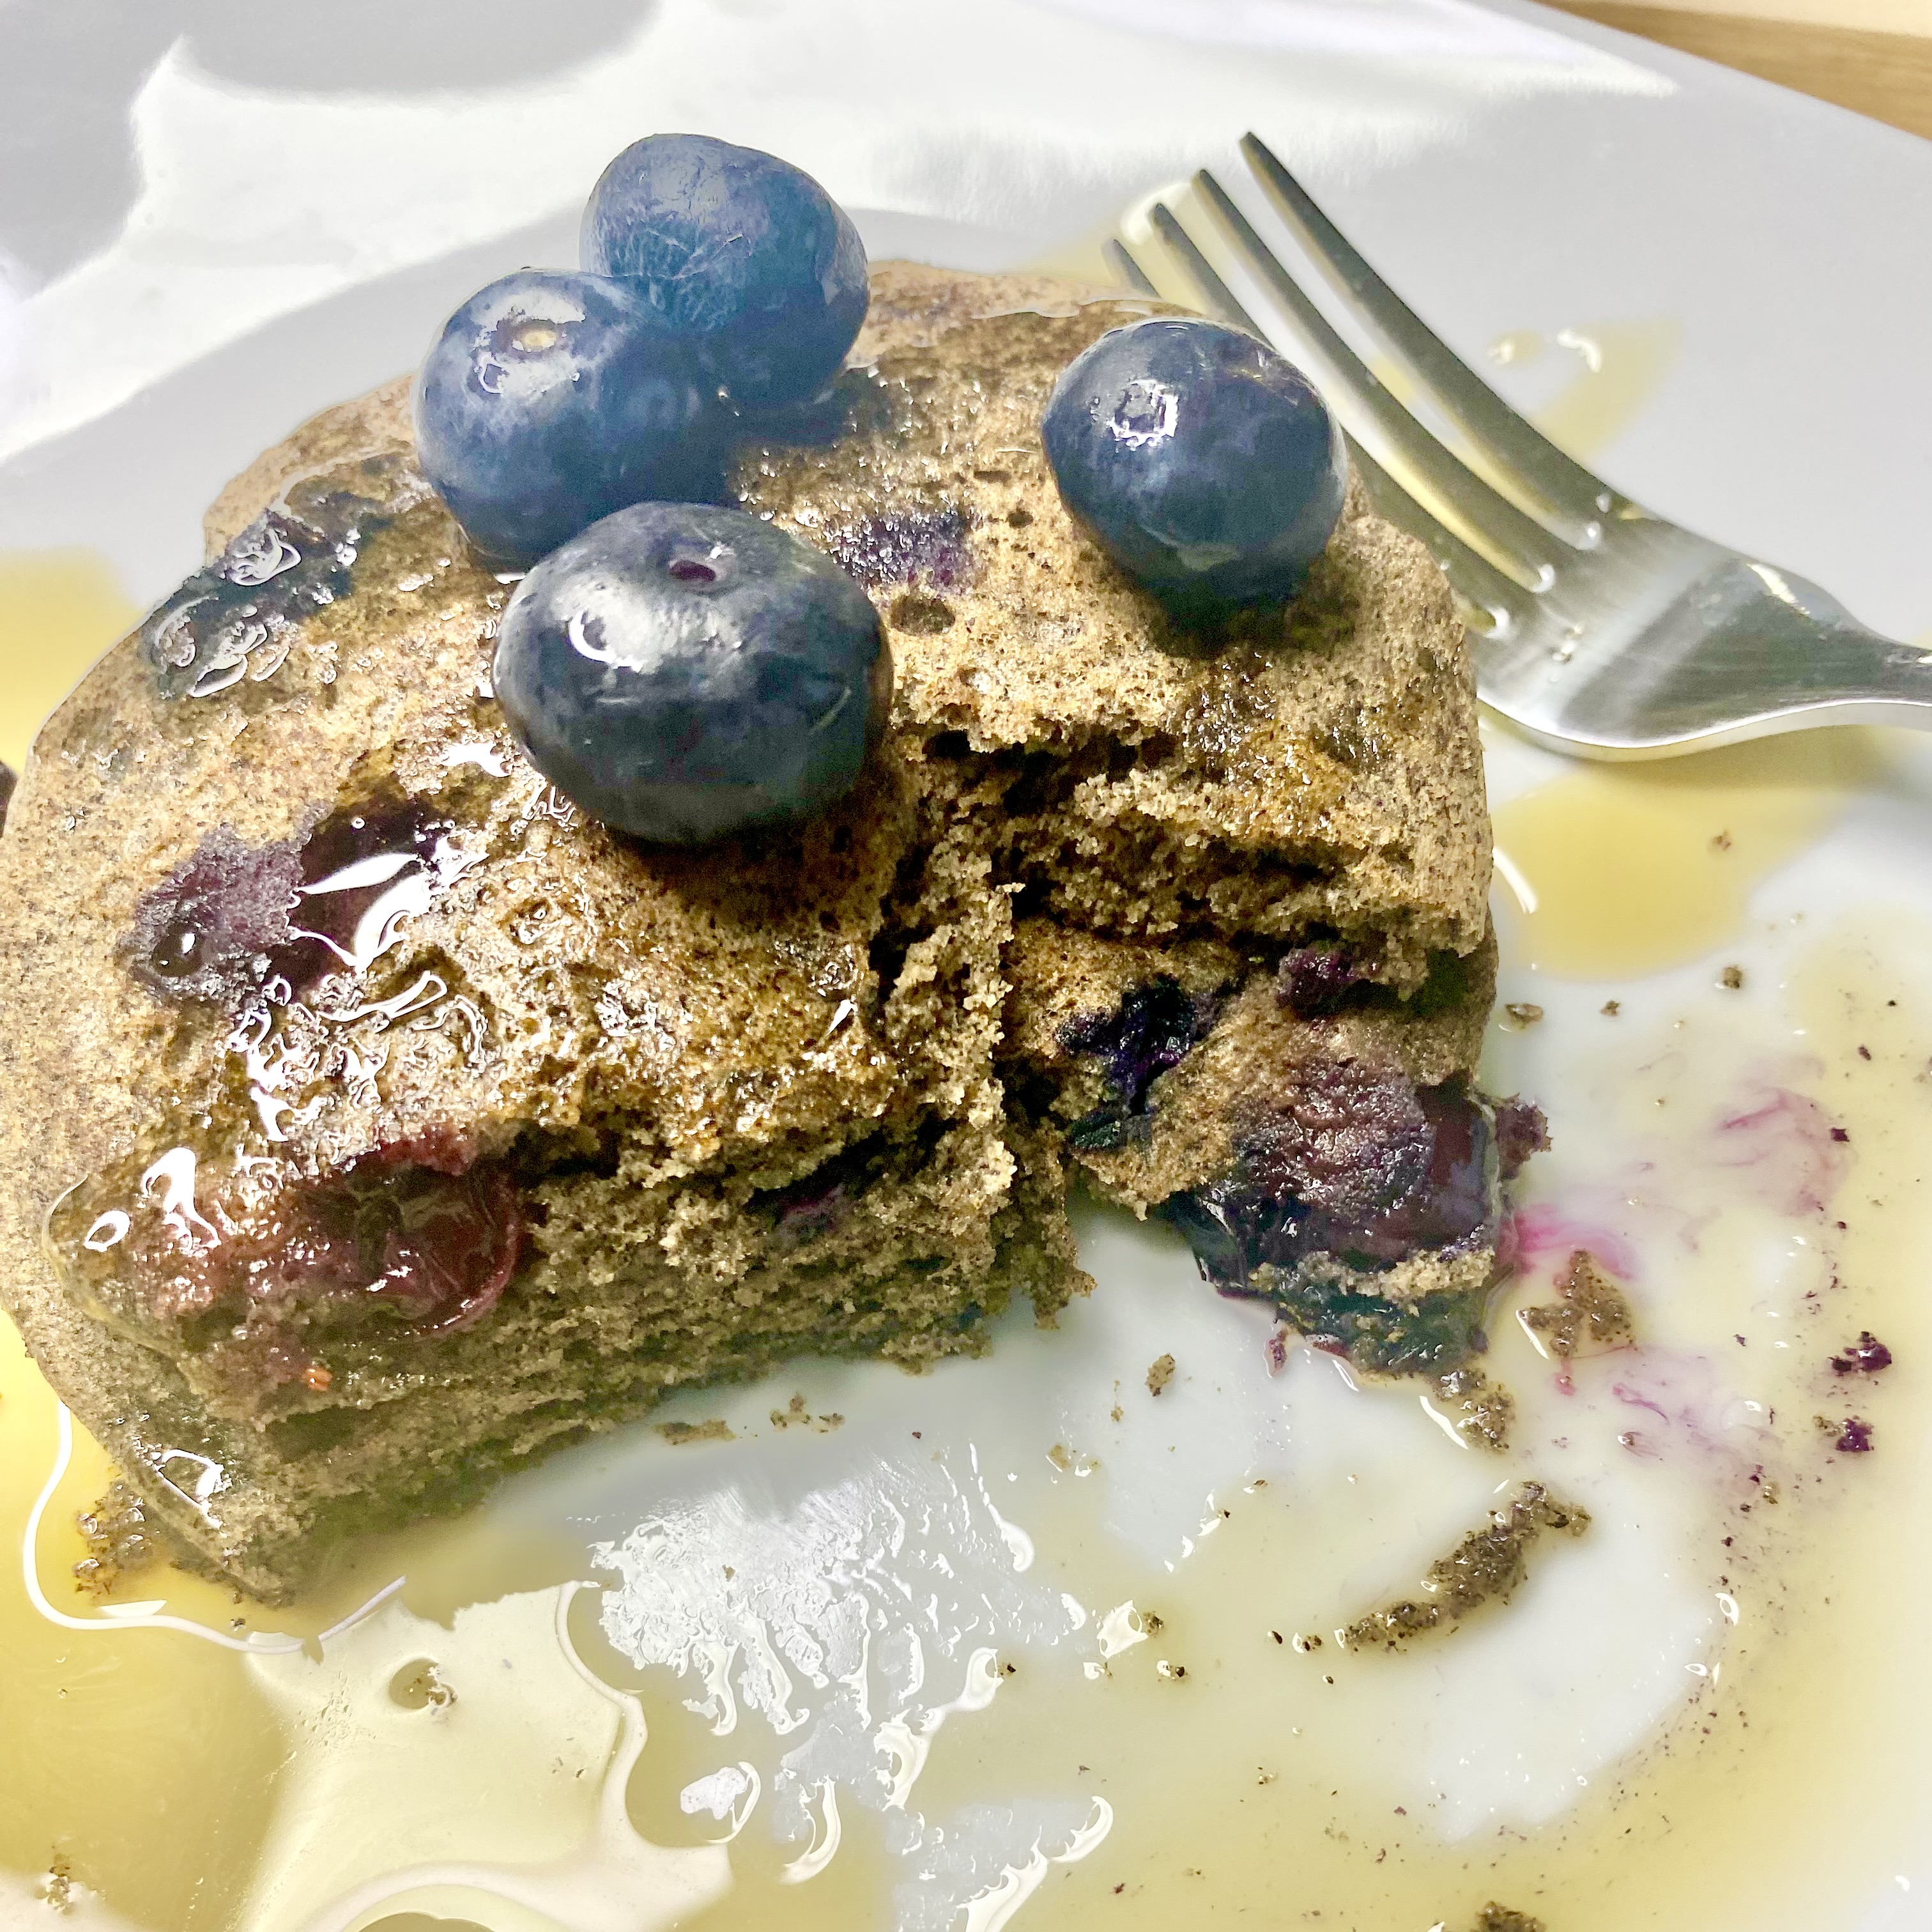 Buckwheat blueberry pancakes with syrup